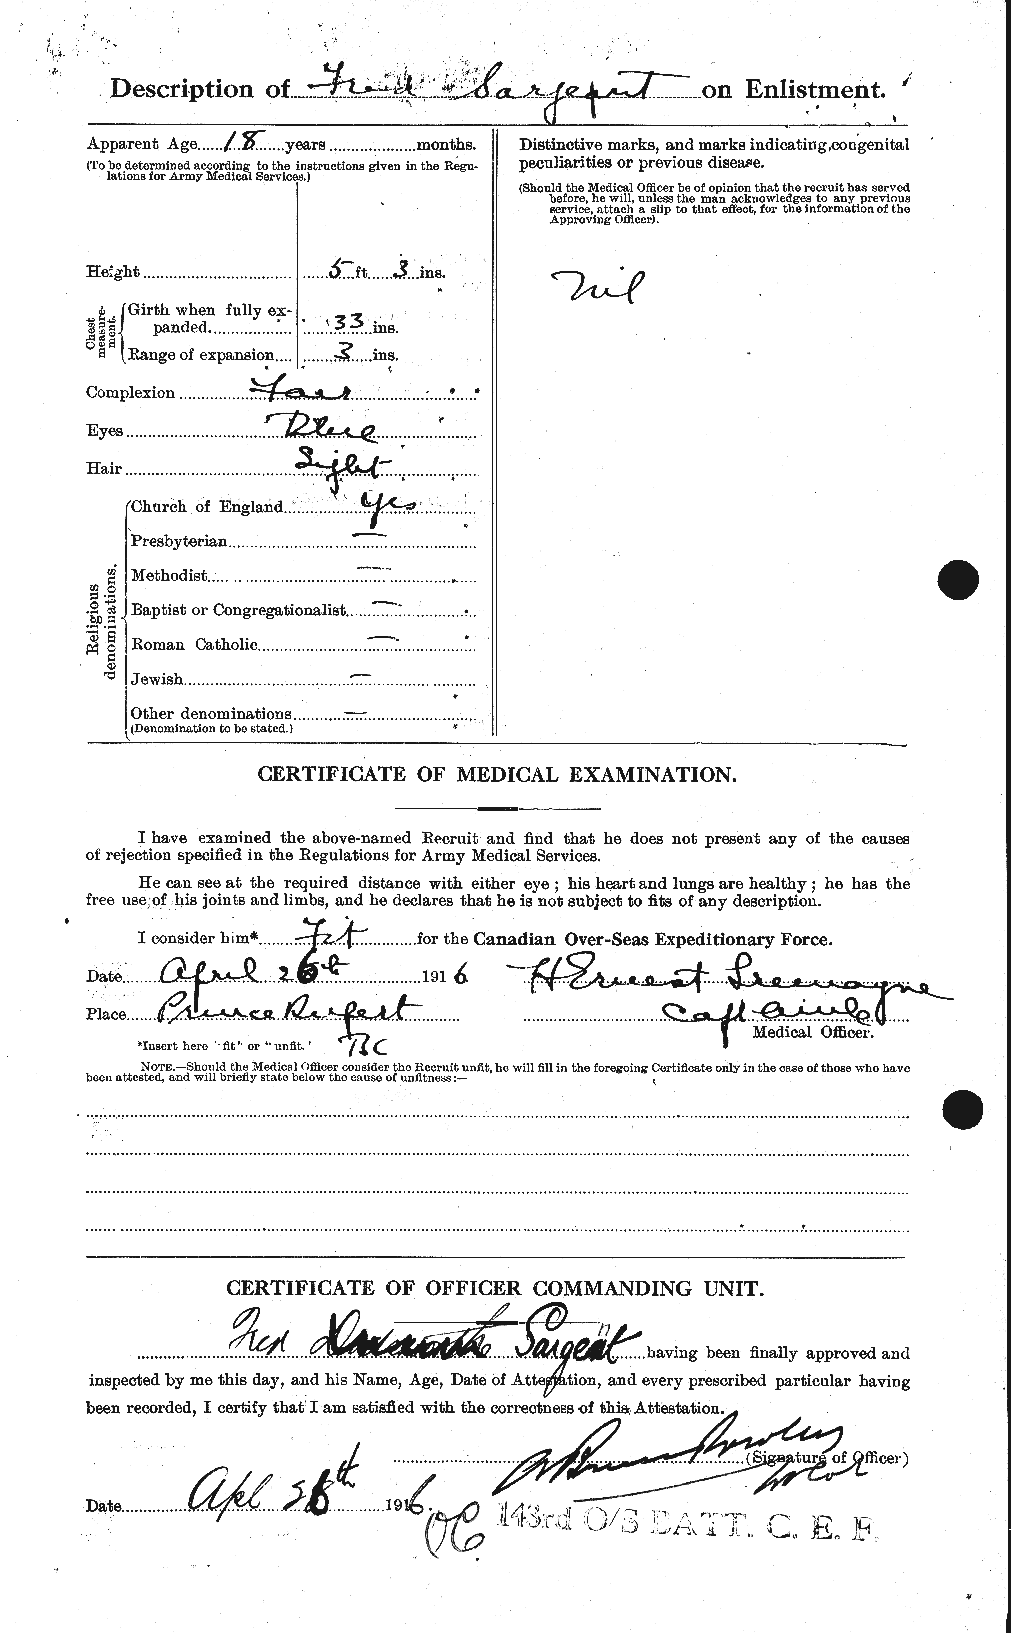 Personnel Records of the First World War - CEF 079157b